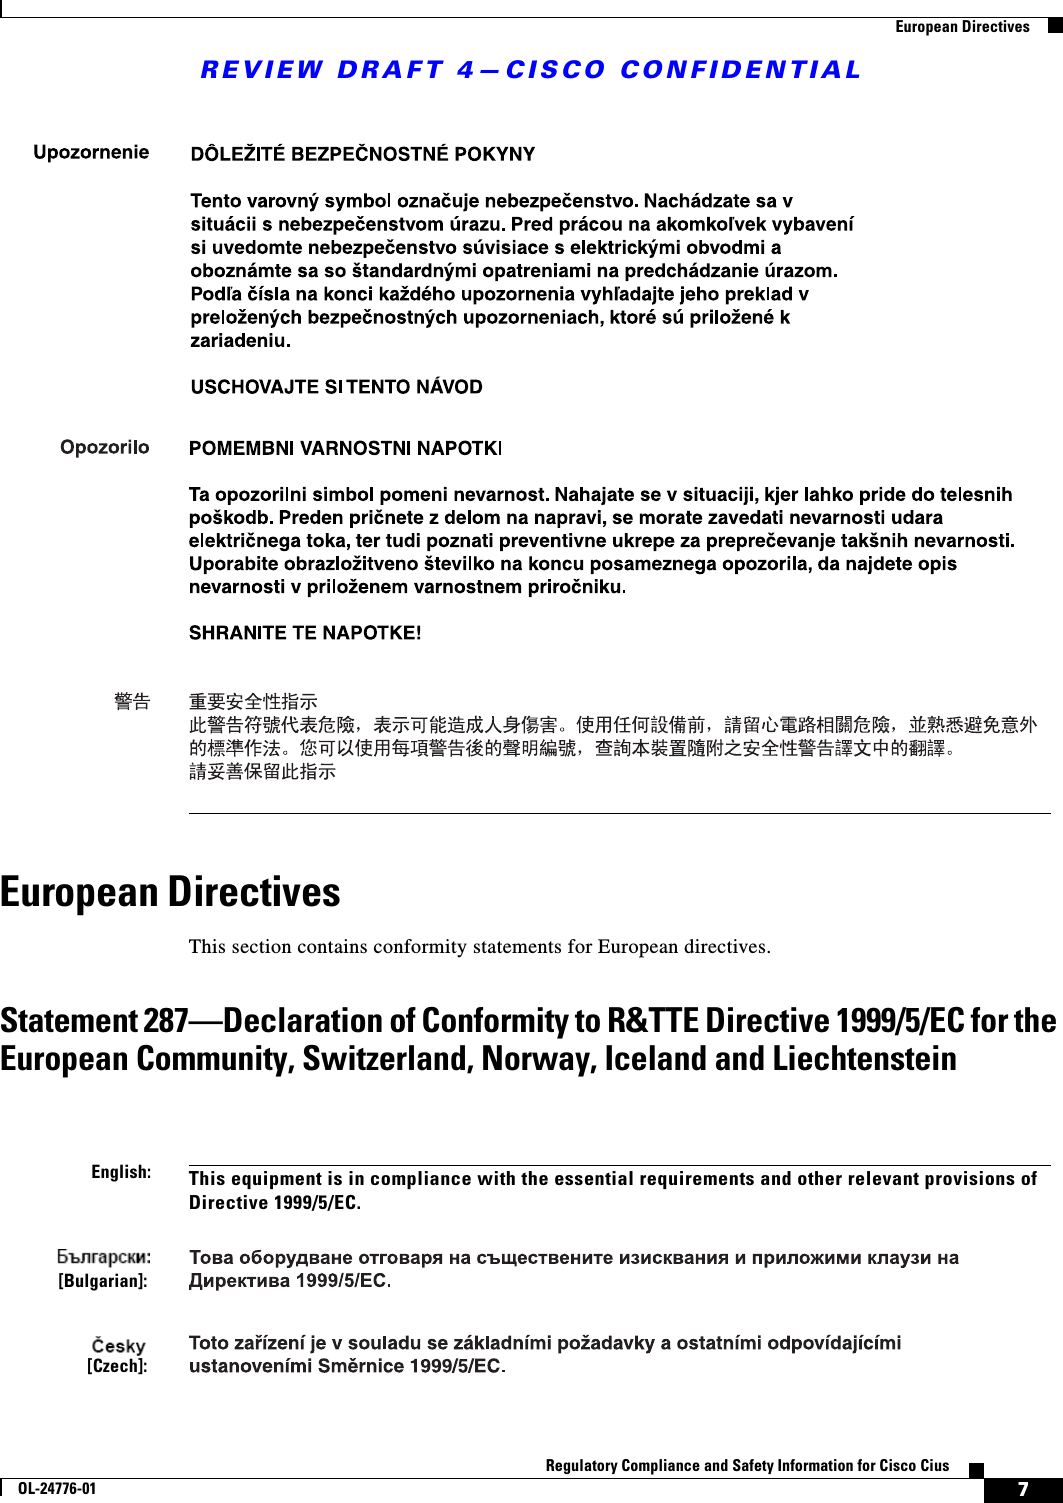 REVIEW DRAFT 4—CISCO CONFIDENTIAL7Regulatory Compliance and Safety Information for Cisco CiusOL-24776-01  European DirectivesEuropean DirectivesThis section contains conformity statements for European directives.Statement 287—Declaration of Conformity to R&amp;TTE Directive 1999/5/EC for the European Community, Switzerland, Norway, Iceland and LiechtensteinEnglish:This equipment is in compliance with the essential requirements and other relevant provisions of Directive 1999/5/EC.[Bulgarian]: [Czech]: 